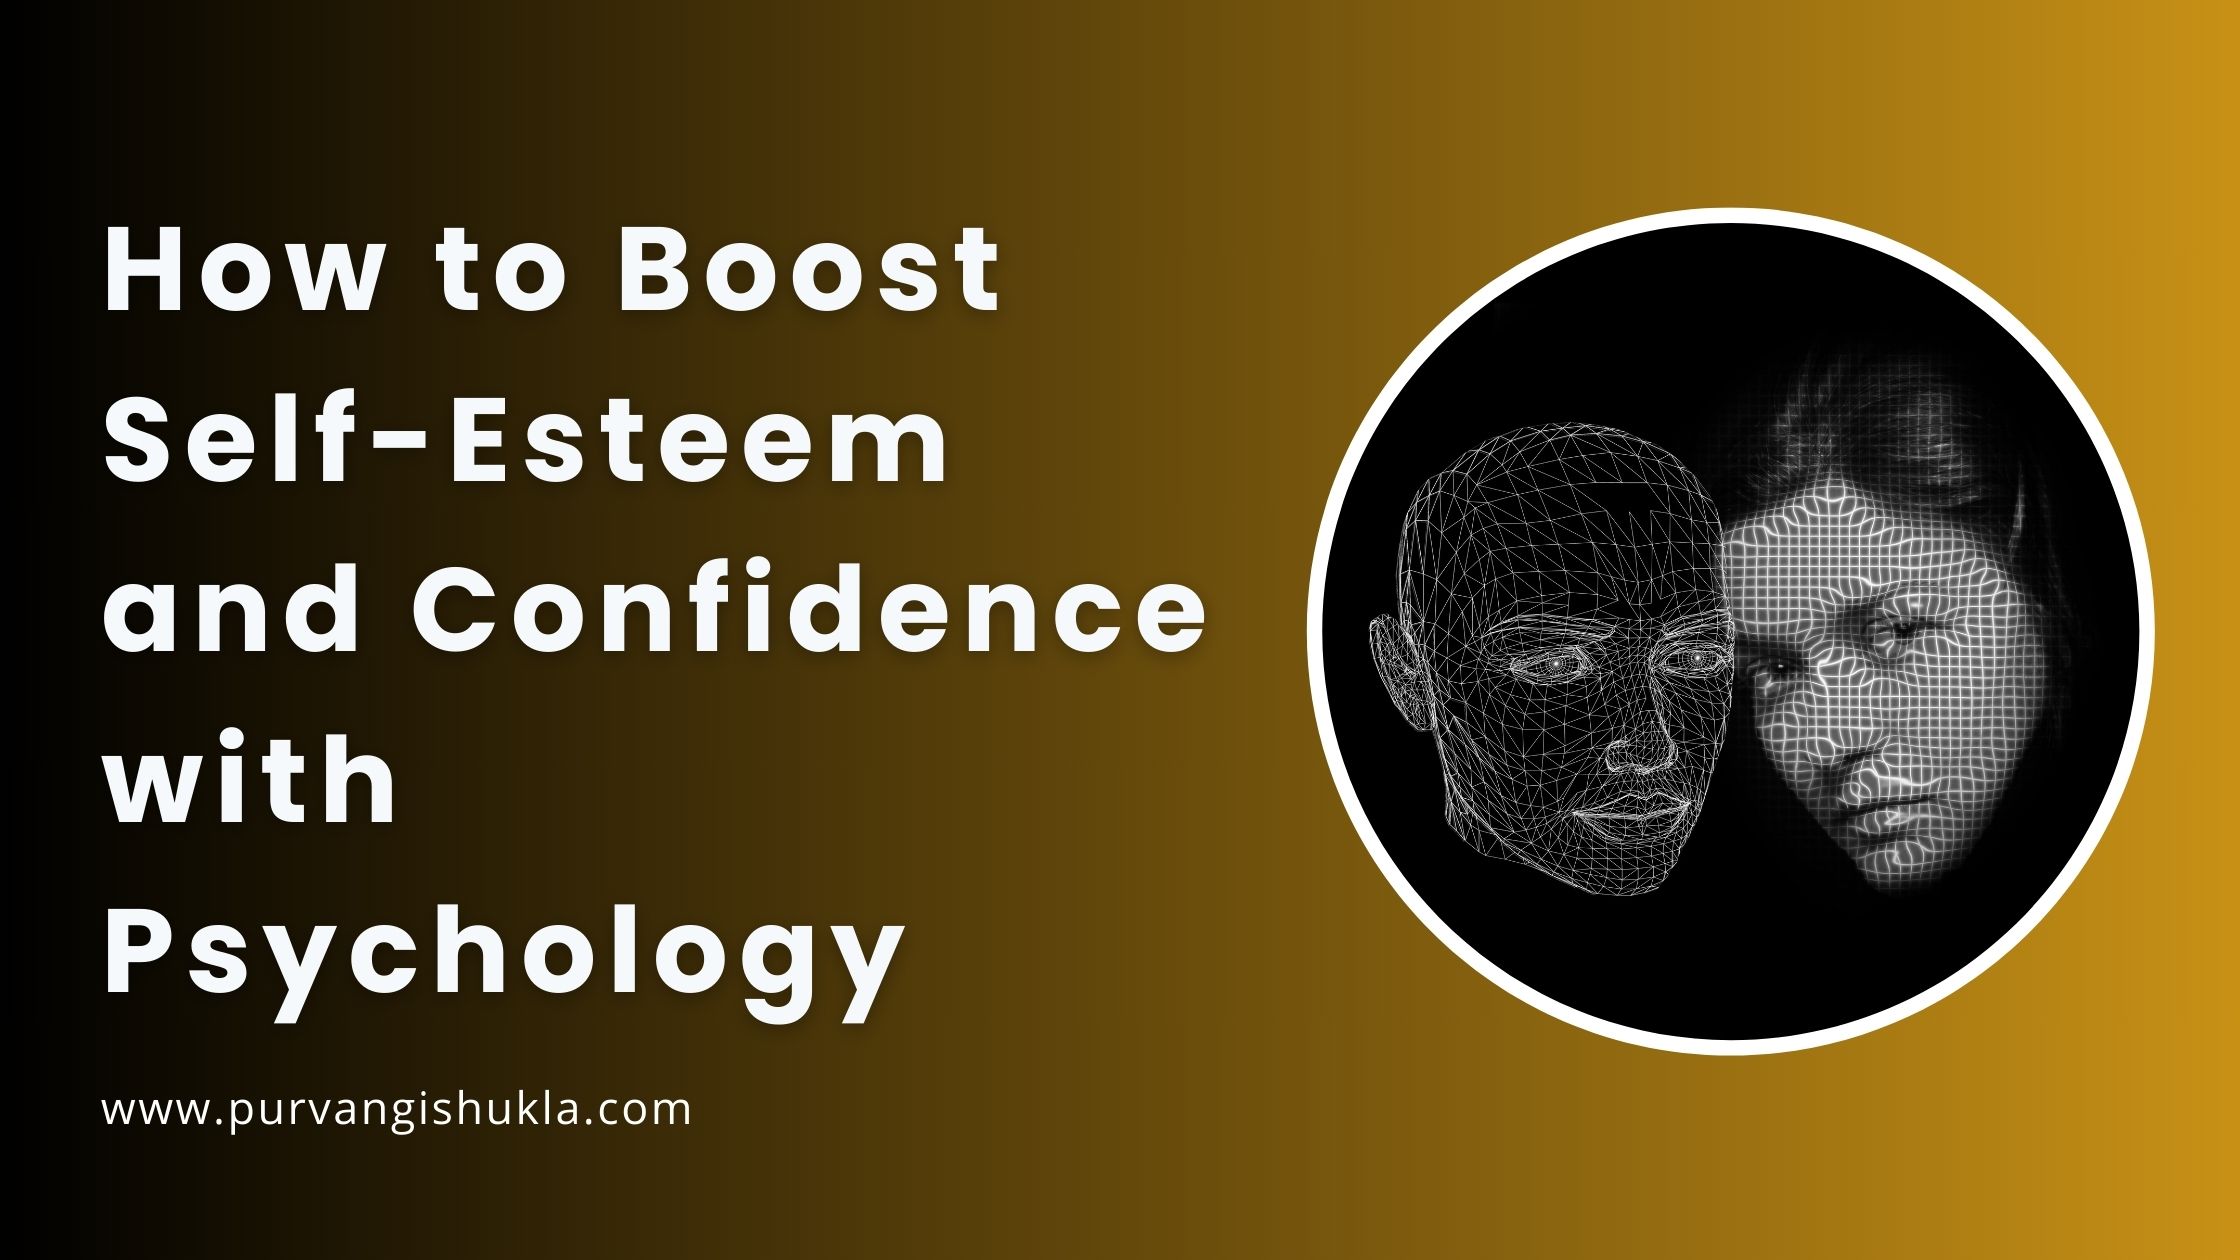 How to Boost Self-Esteem and Confidence with Psychology